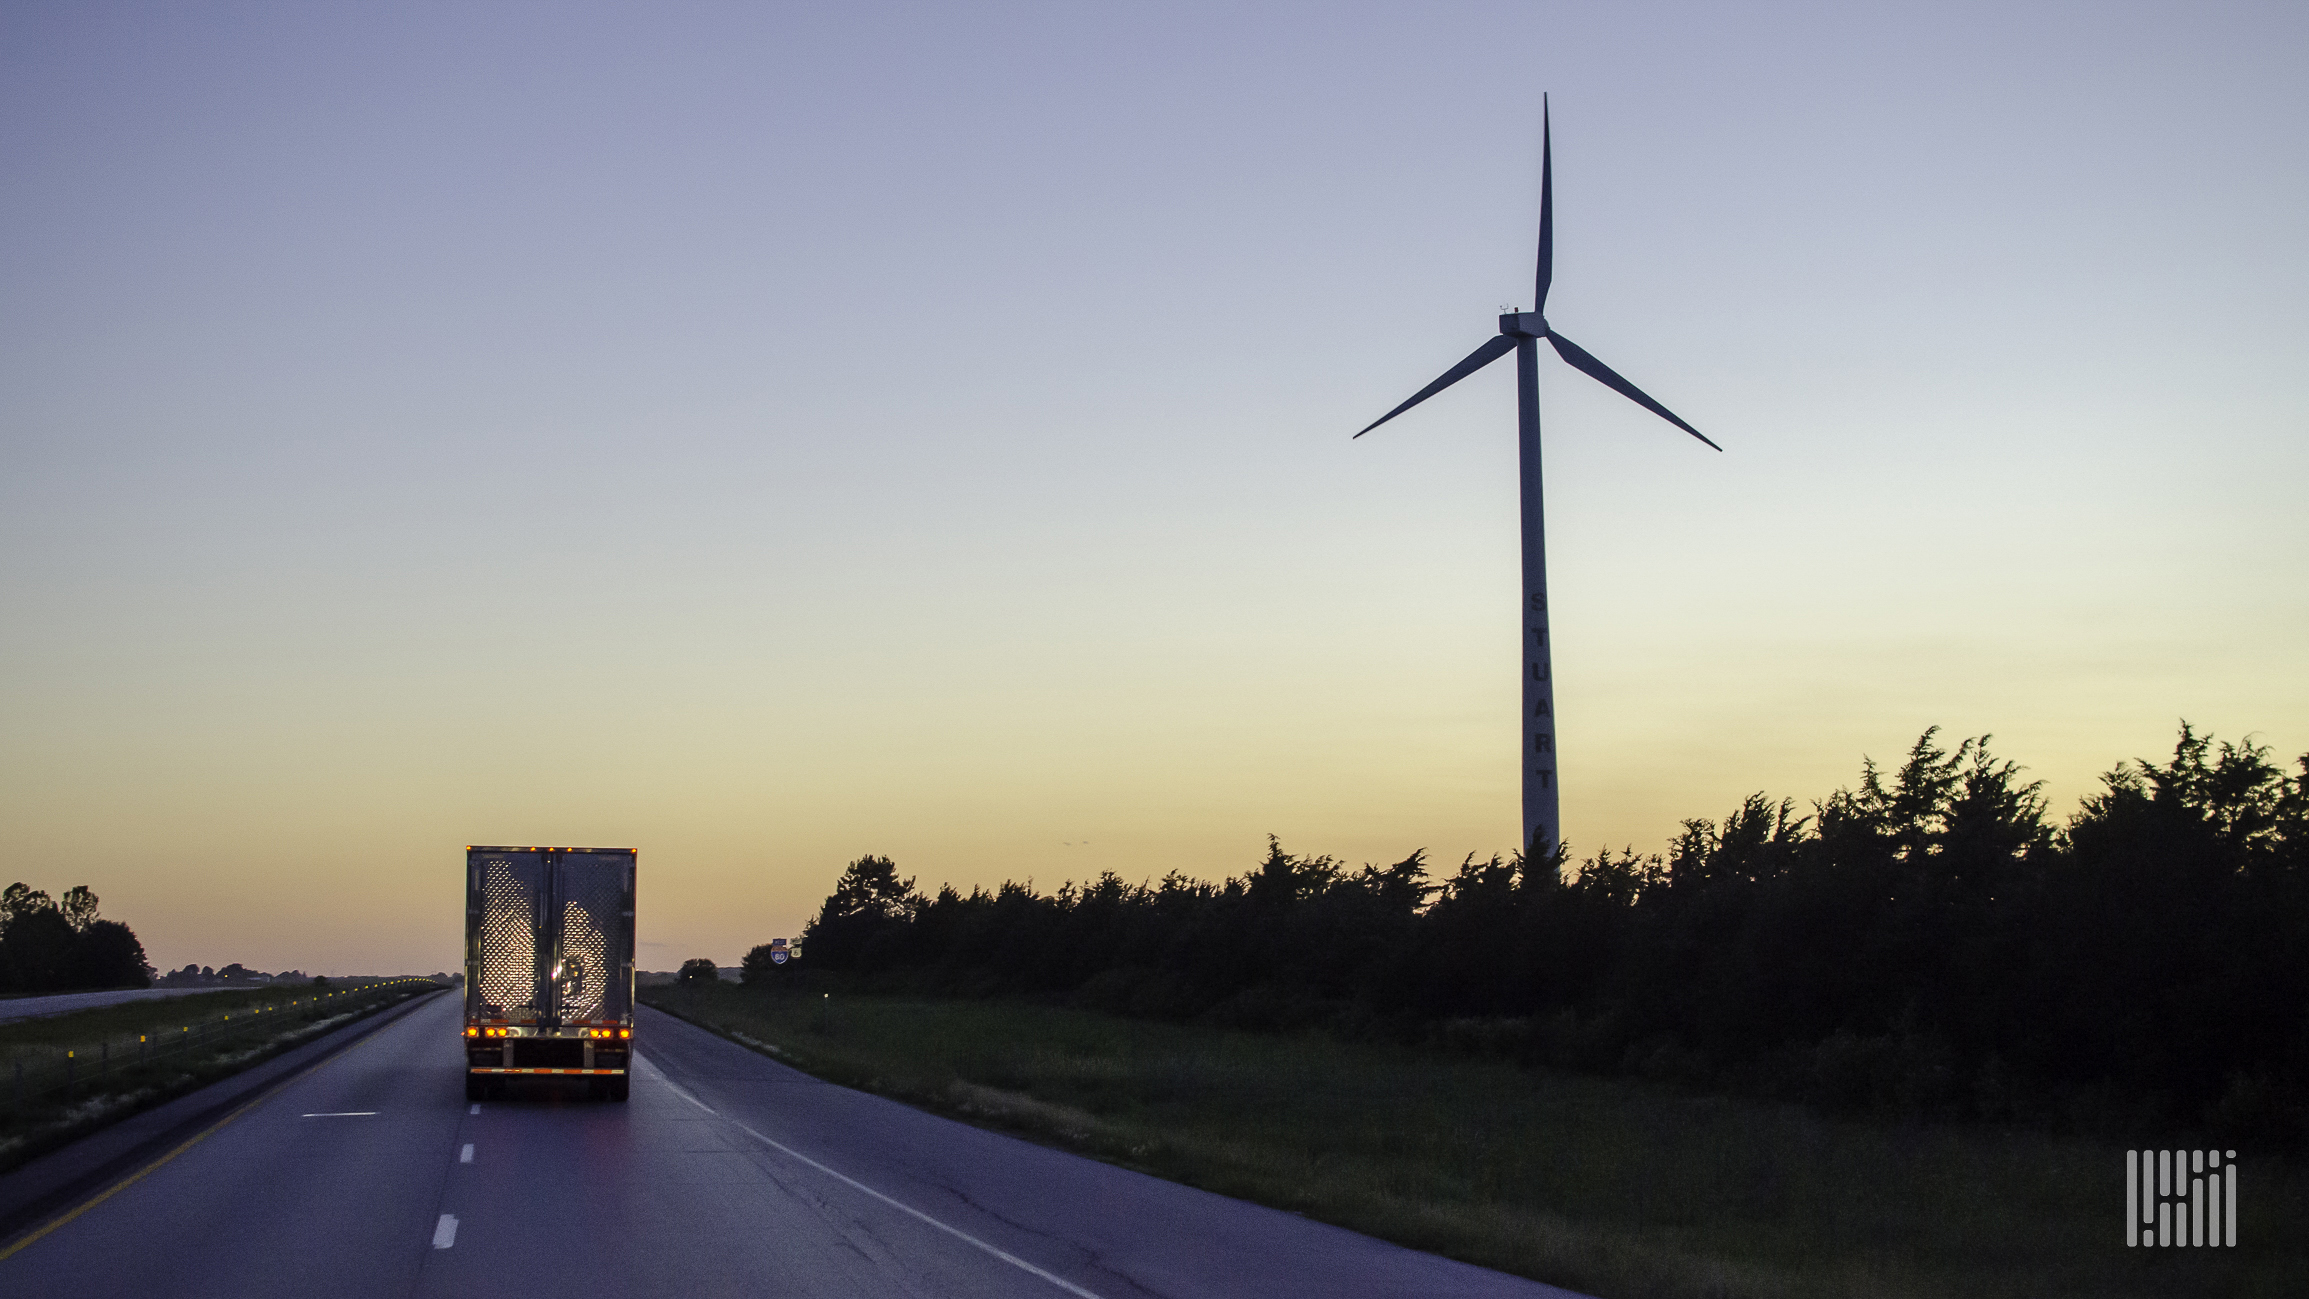 A semi-truck drives down the road with a sunset and wind turbine in the landscape.